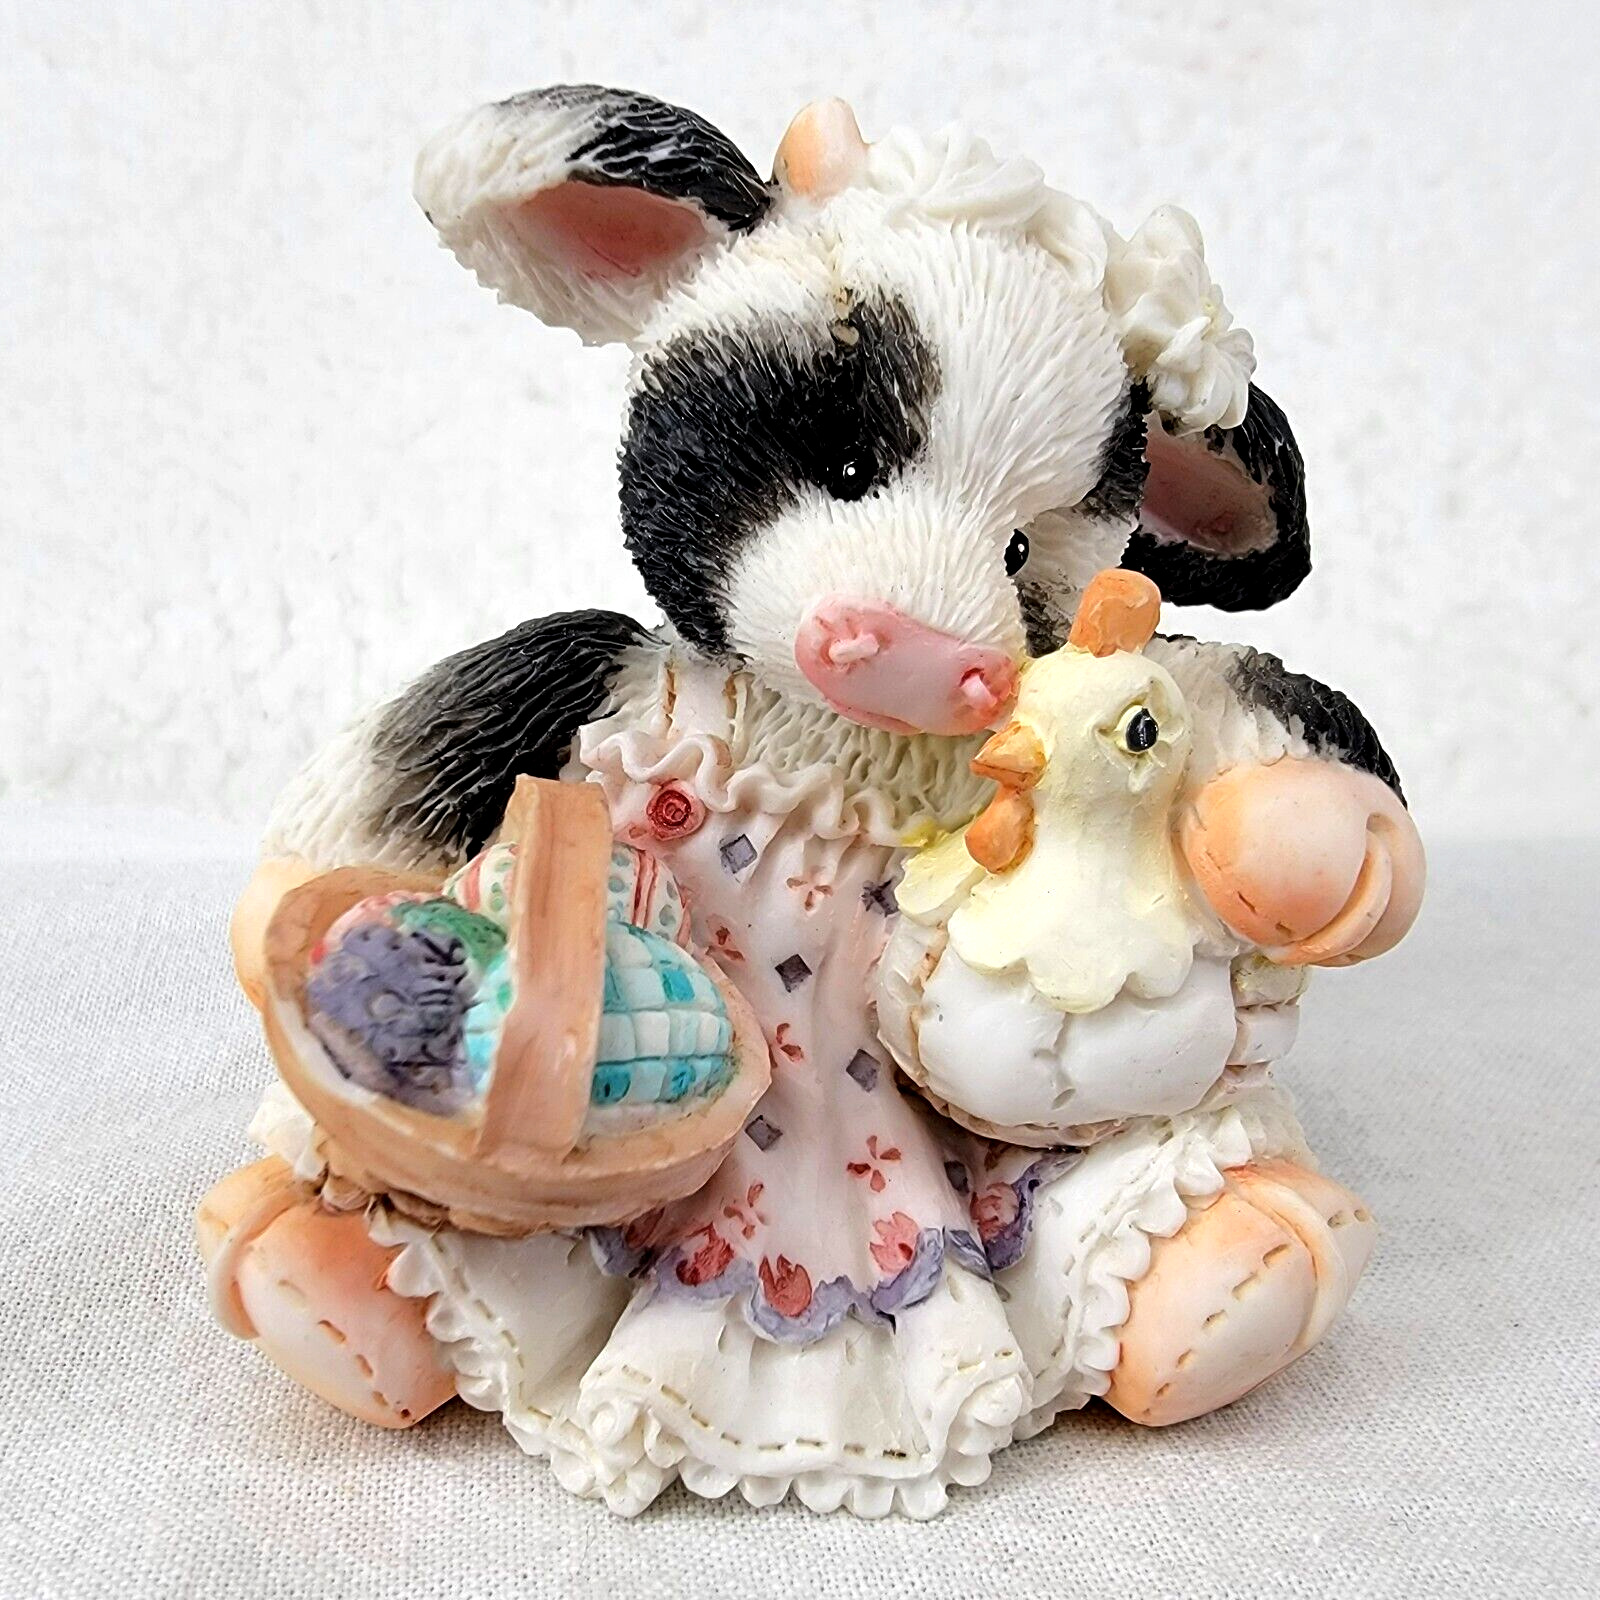 Marys Moo Moos Cow Easter Basket Put All My Eggs In Your Basket 104884 Vtg 1994